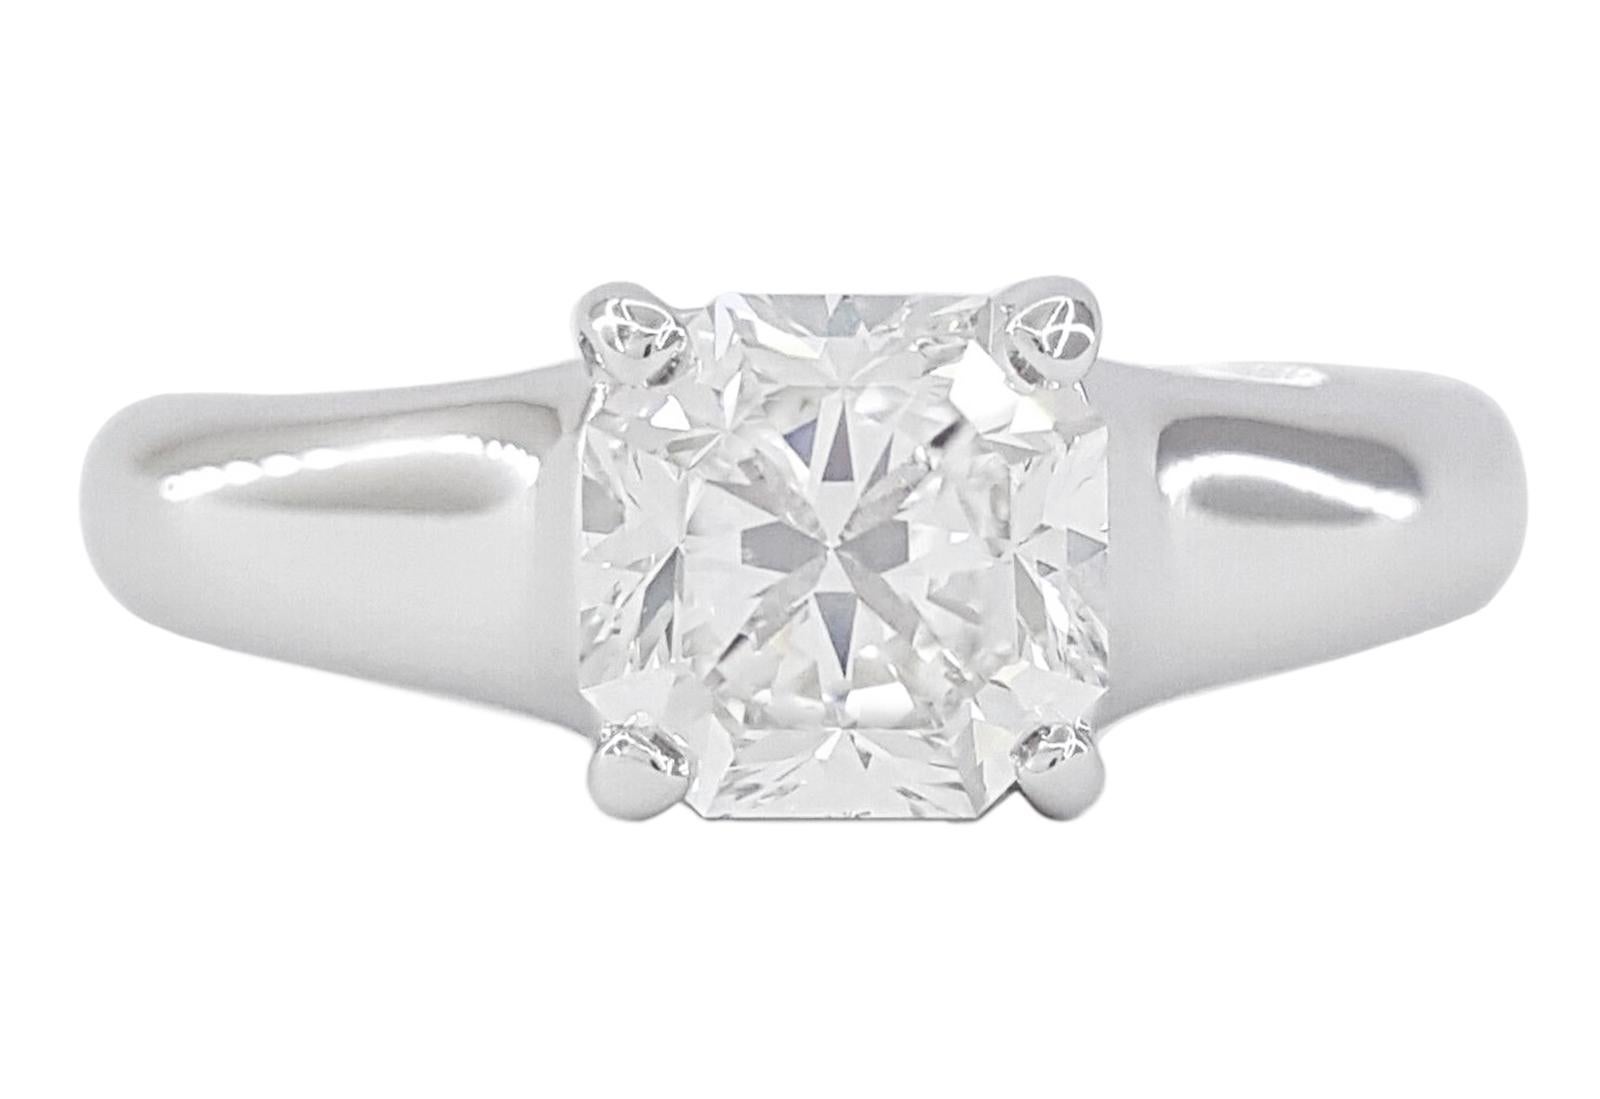 This stunning 1.00 carat F color VS Radiant Square Cut diamond ring in 18K white gold is a remarkable piece of jewelry. At the heart of this ring gleams a captivating 1.00 carat Radiant Square Cut diamond. The Radiant Square Cut is renowned for its